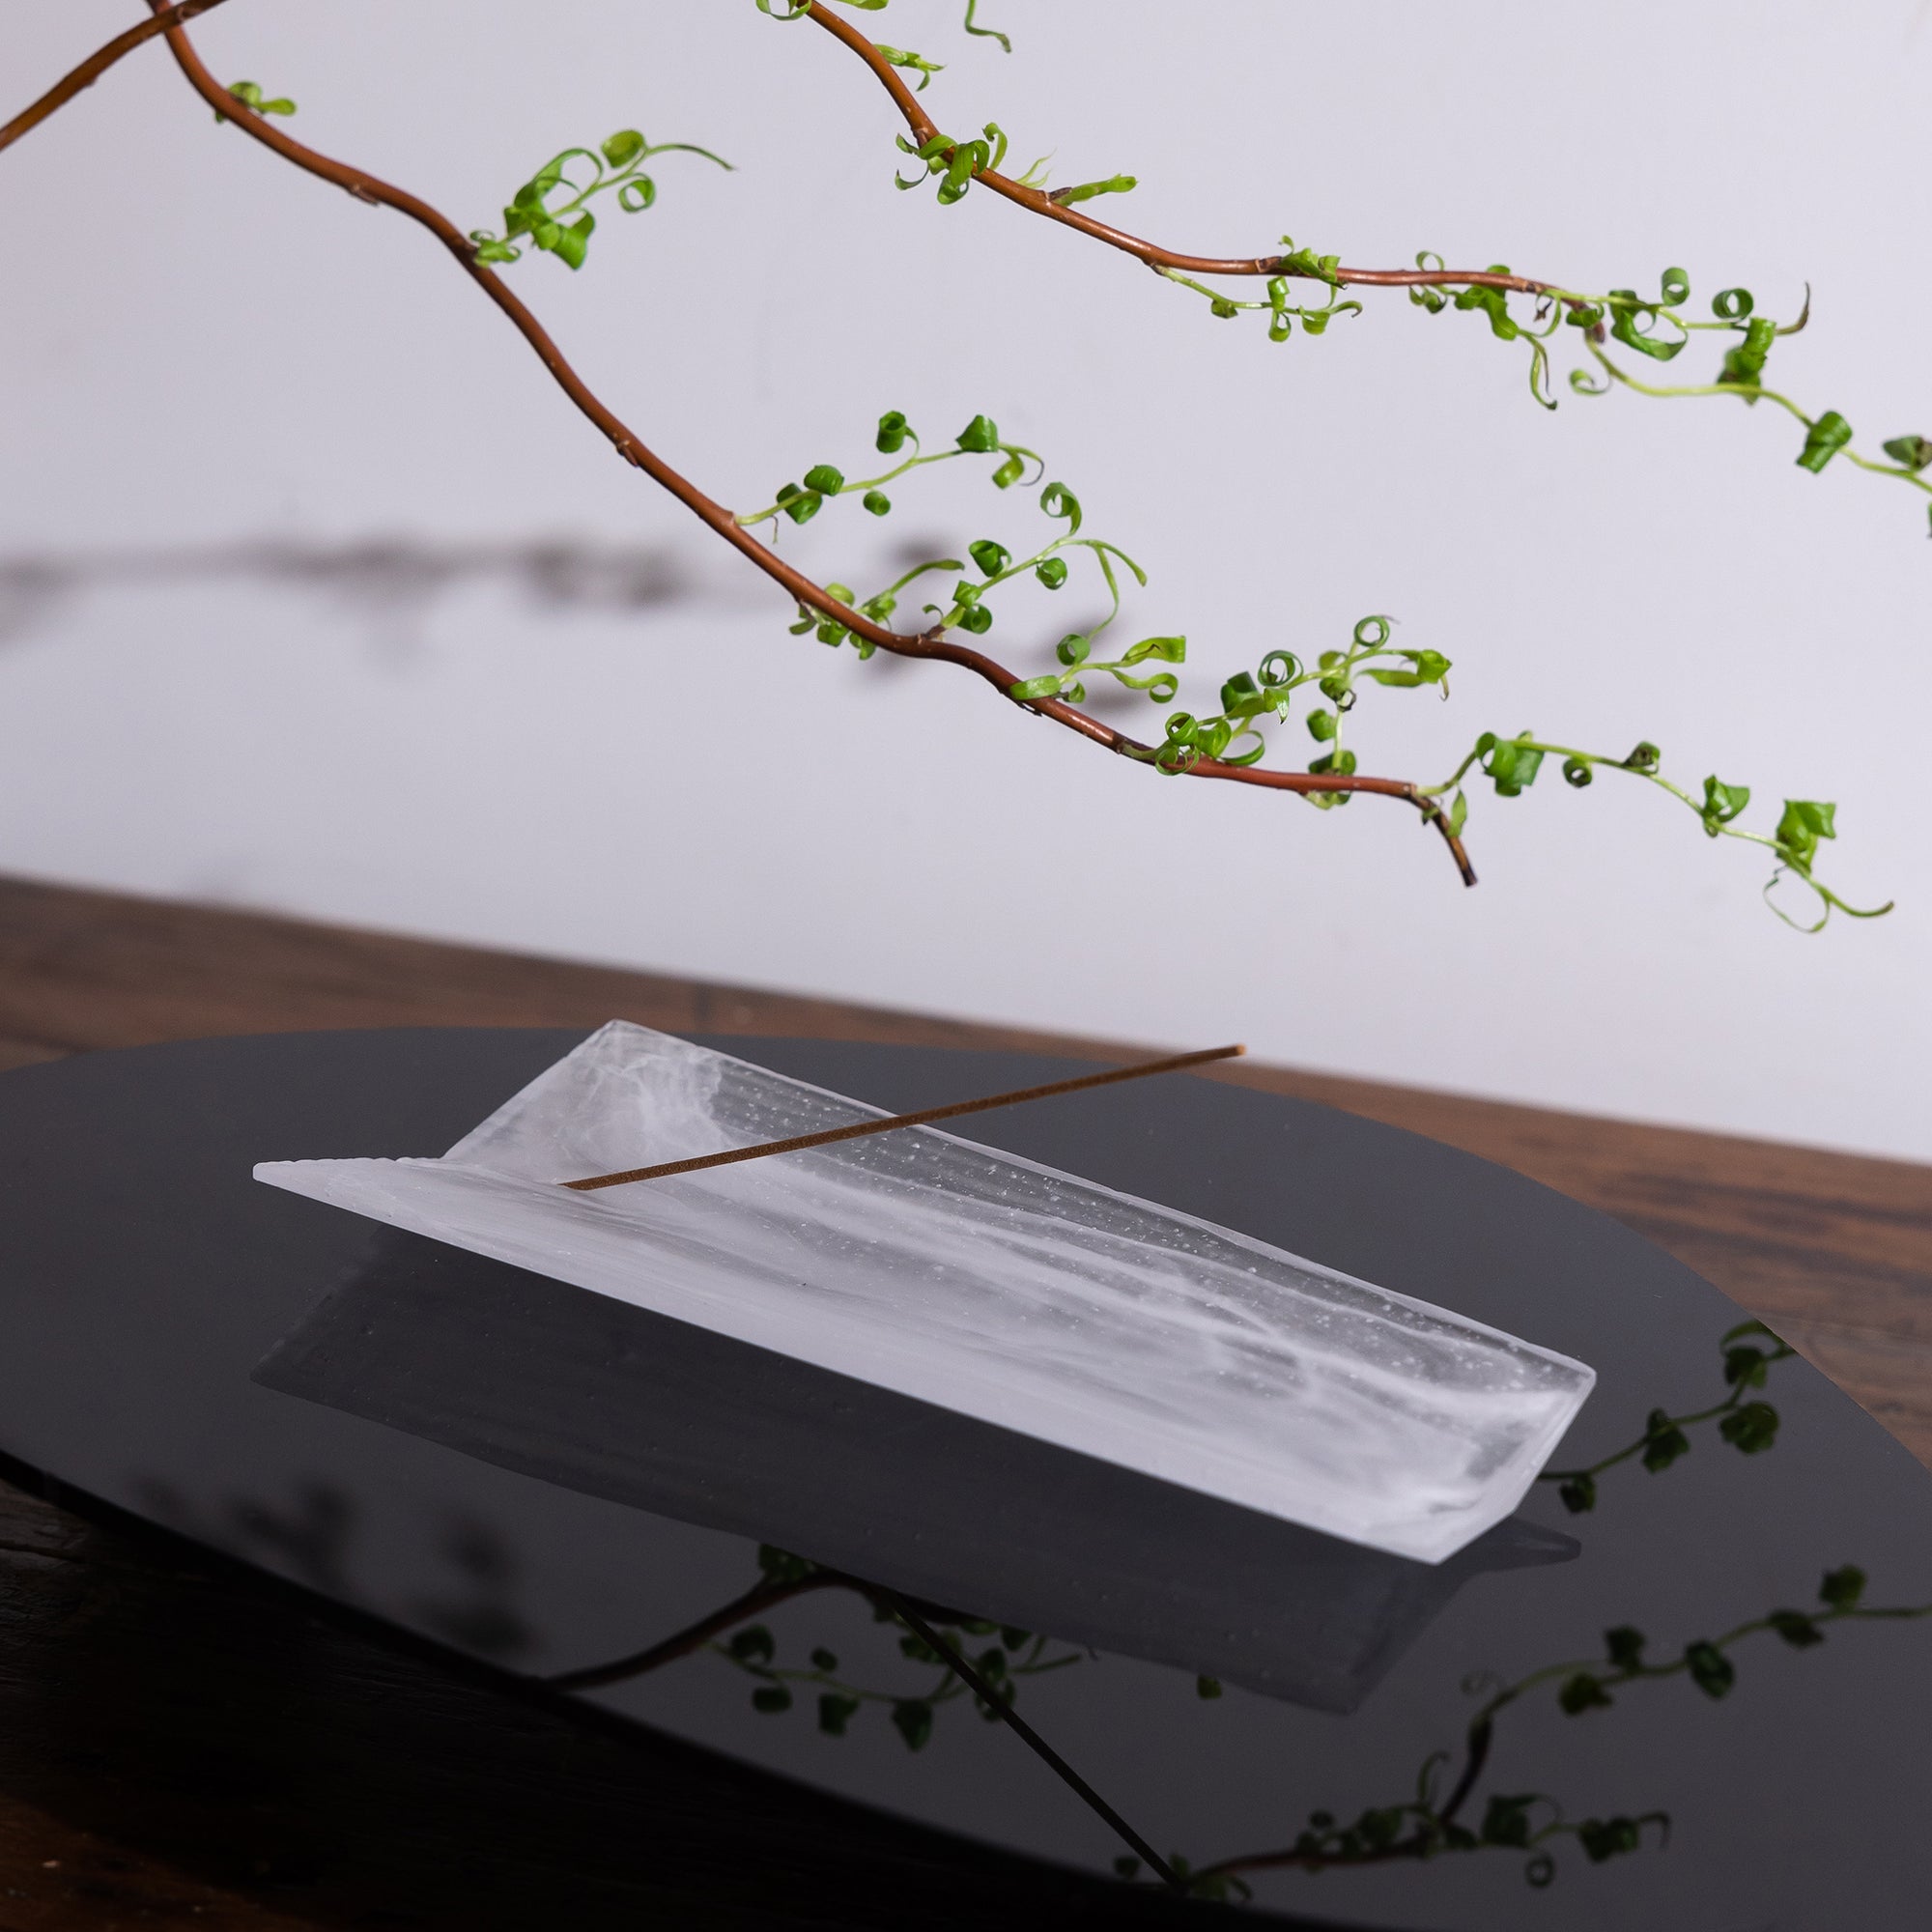 Kin Object's liuli glass incense holder with wood grain patterns on a black table